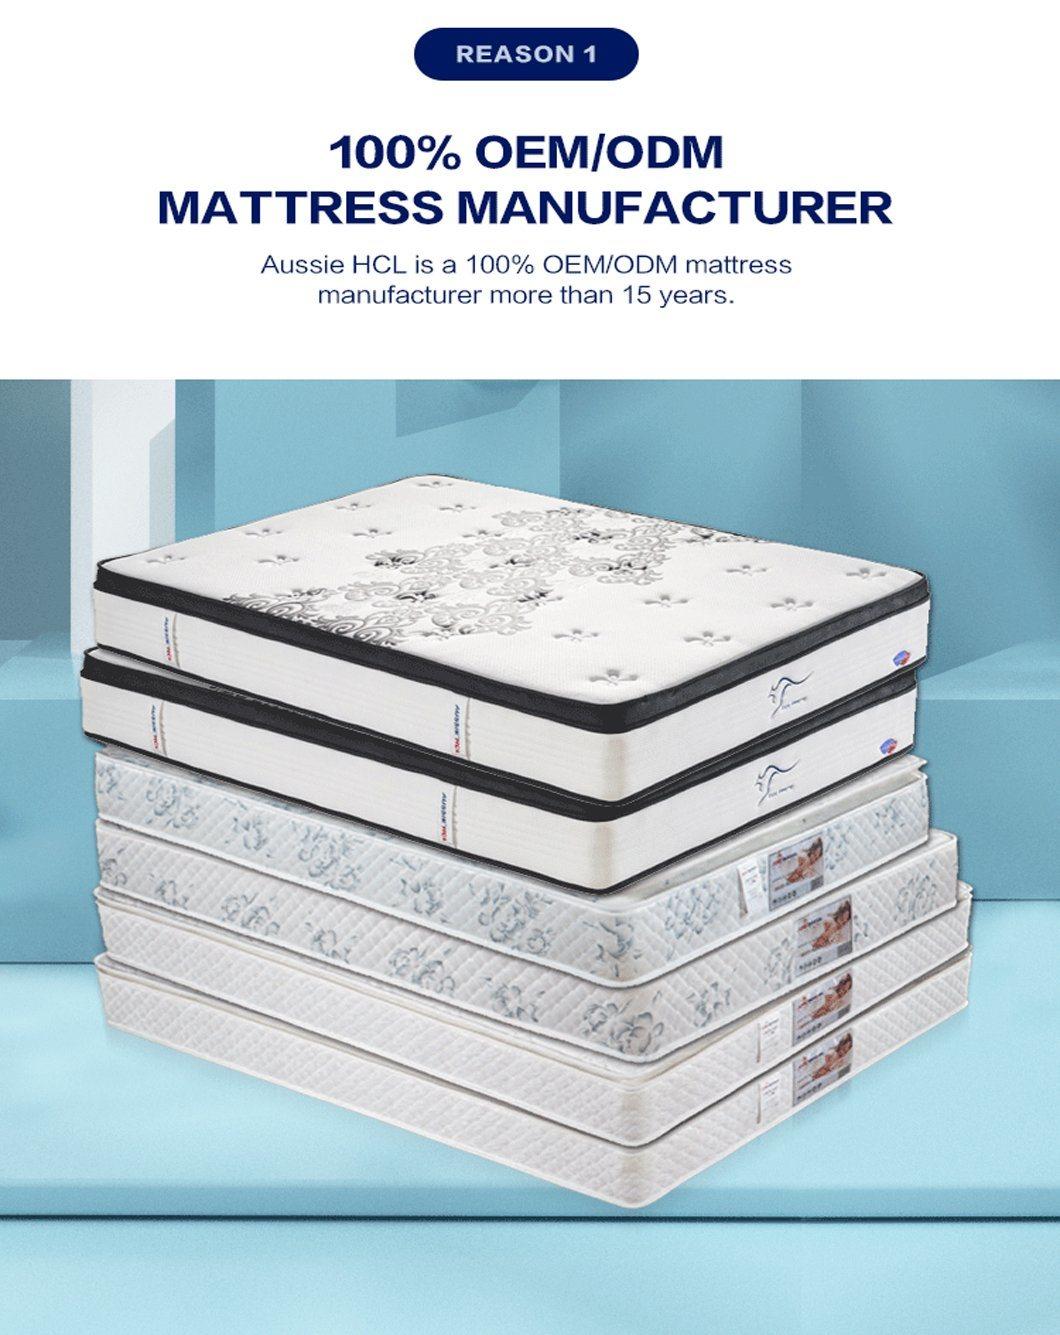 Premium Sleeping Well in a Box The Best Factory Full Inch Mattresses King Double Gel Memory Foam Spring Mattress in a Box